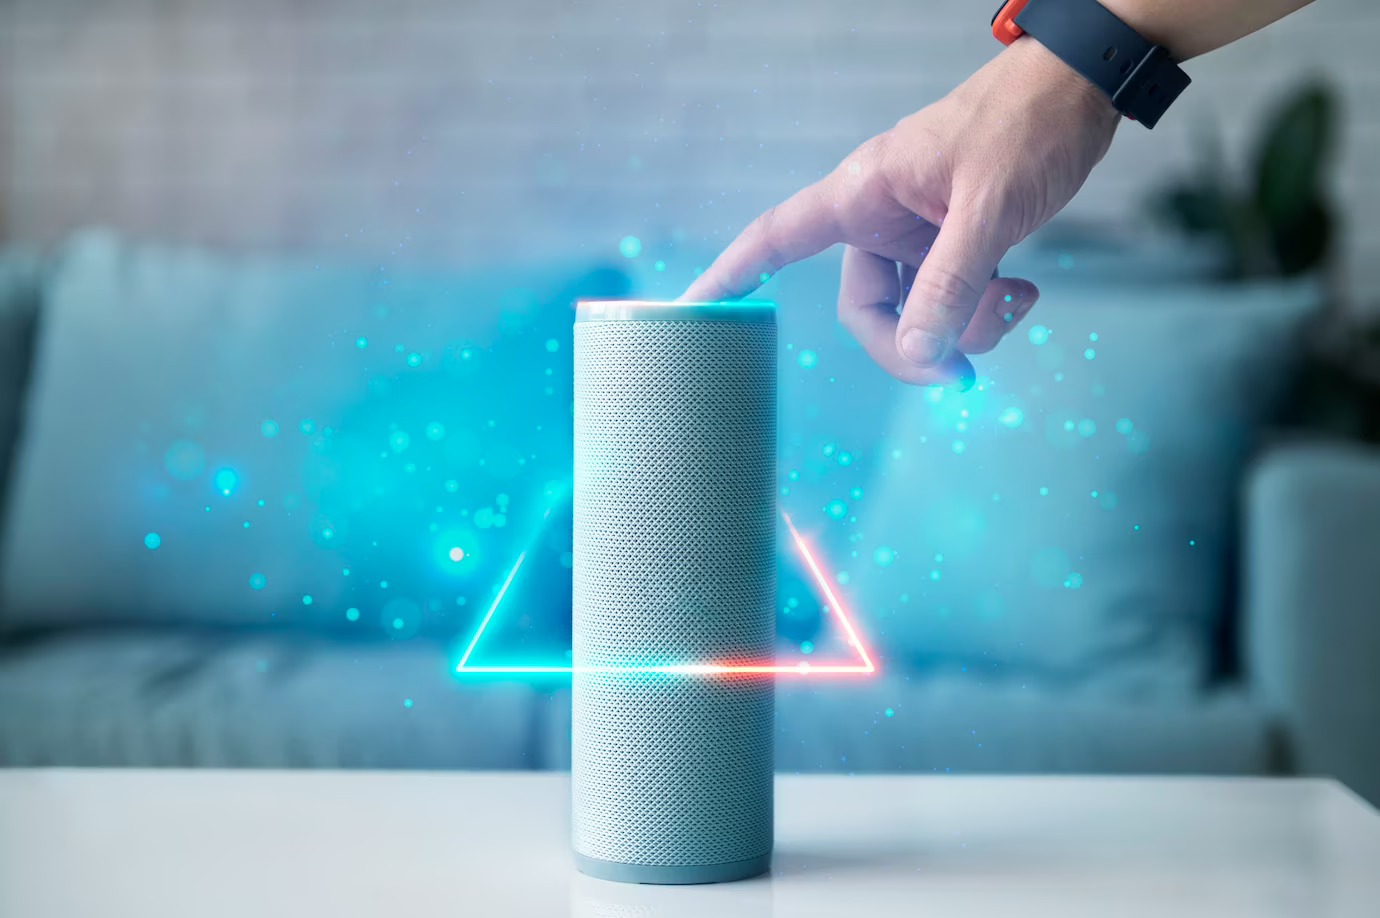 AI-powered Virtual Assistants From Siri to Alexa